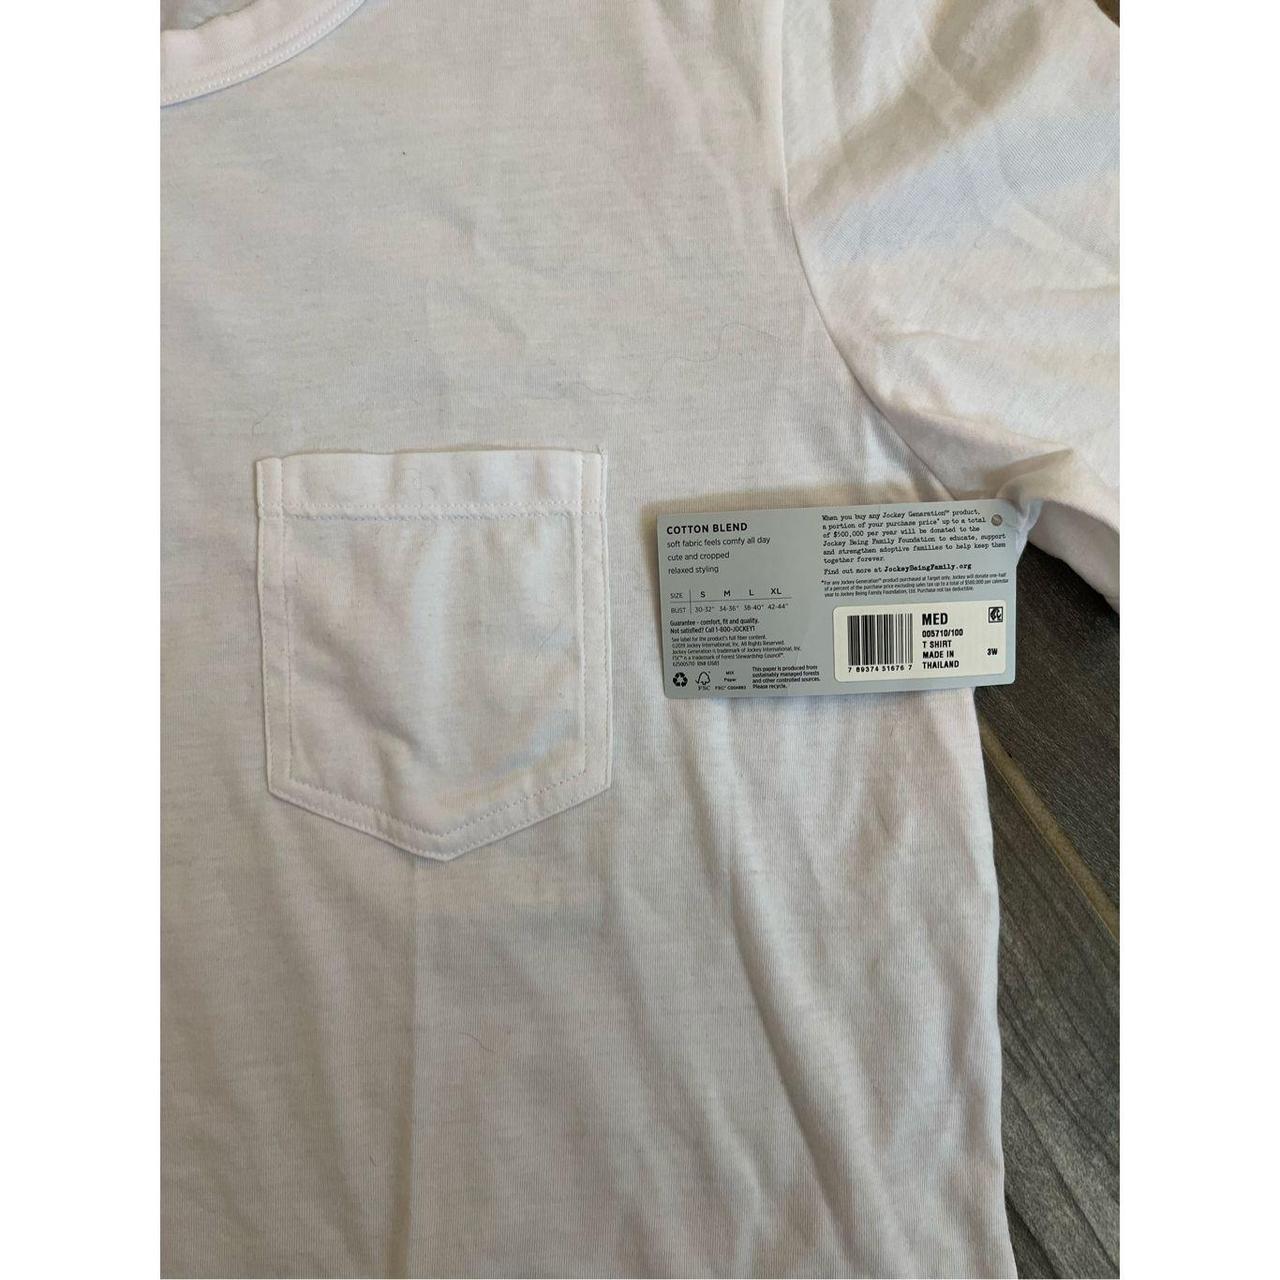 Product Image 2 - Retro vibes crop top
-pocket detail
-60%